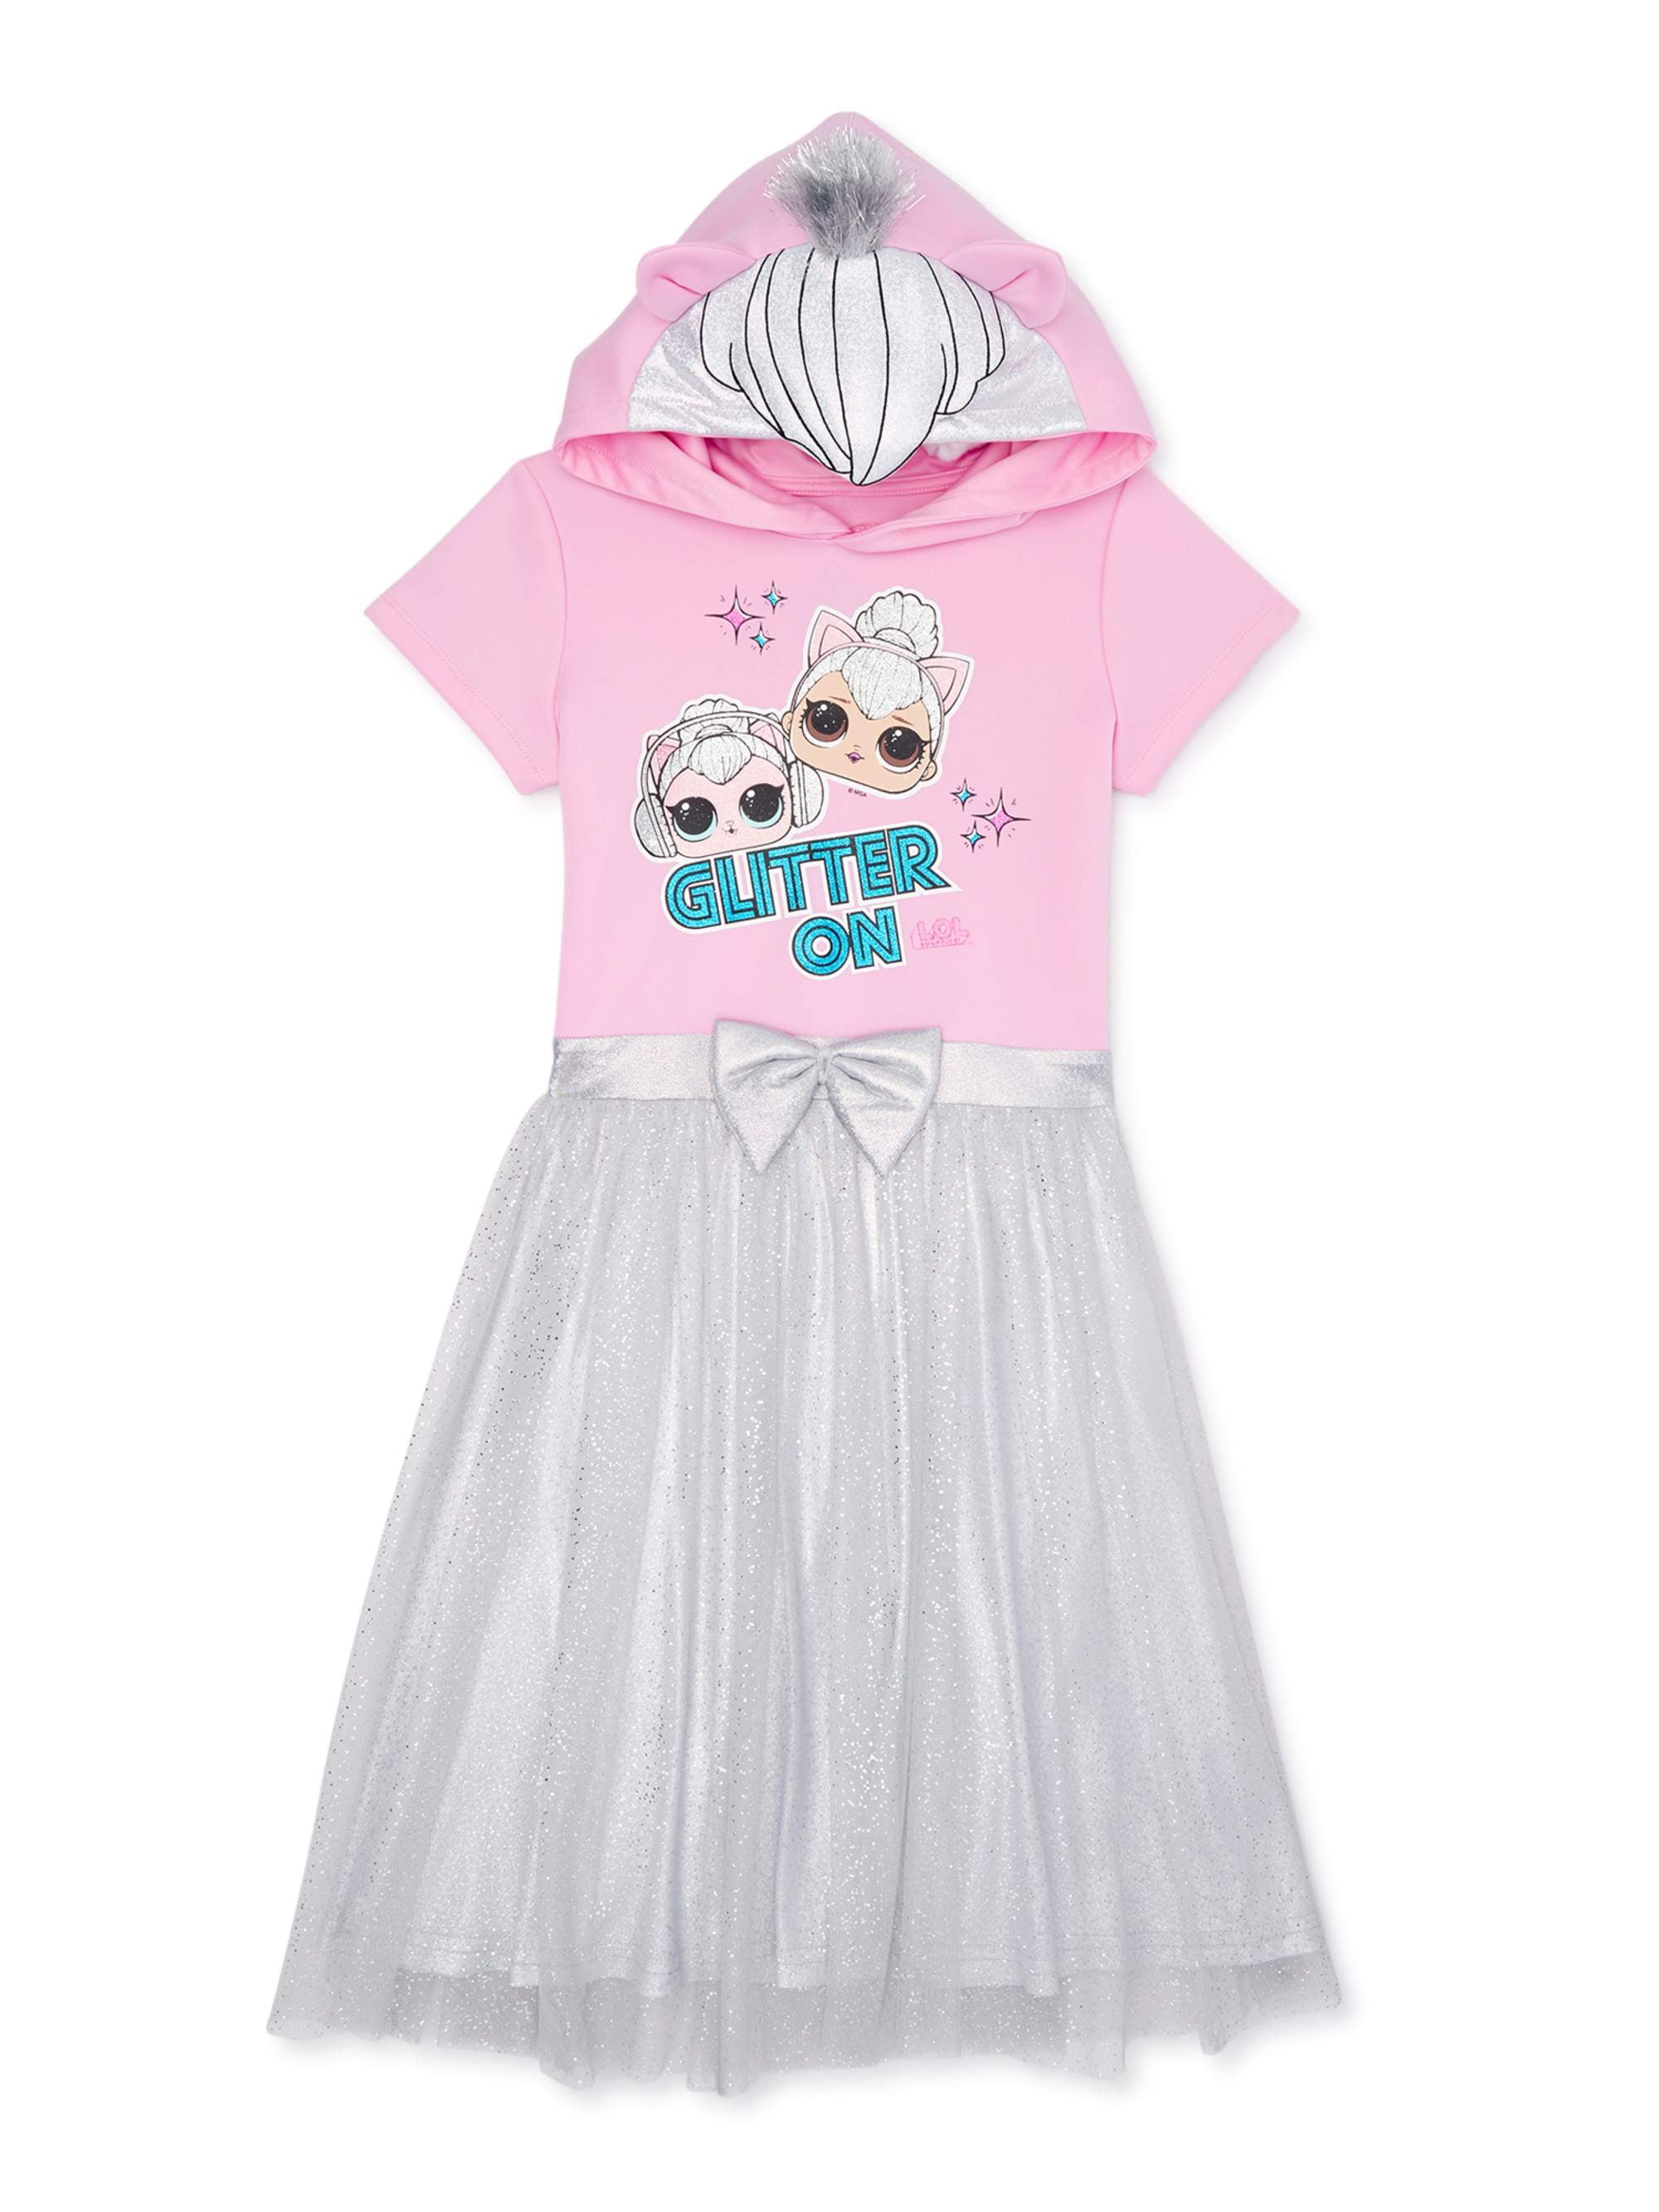 L.O.L Surprise Girls Tutu Dress with Tulle Skirt